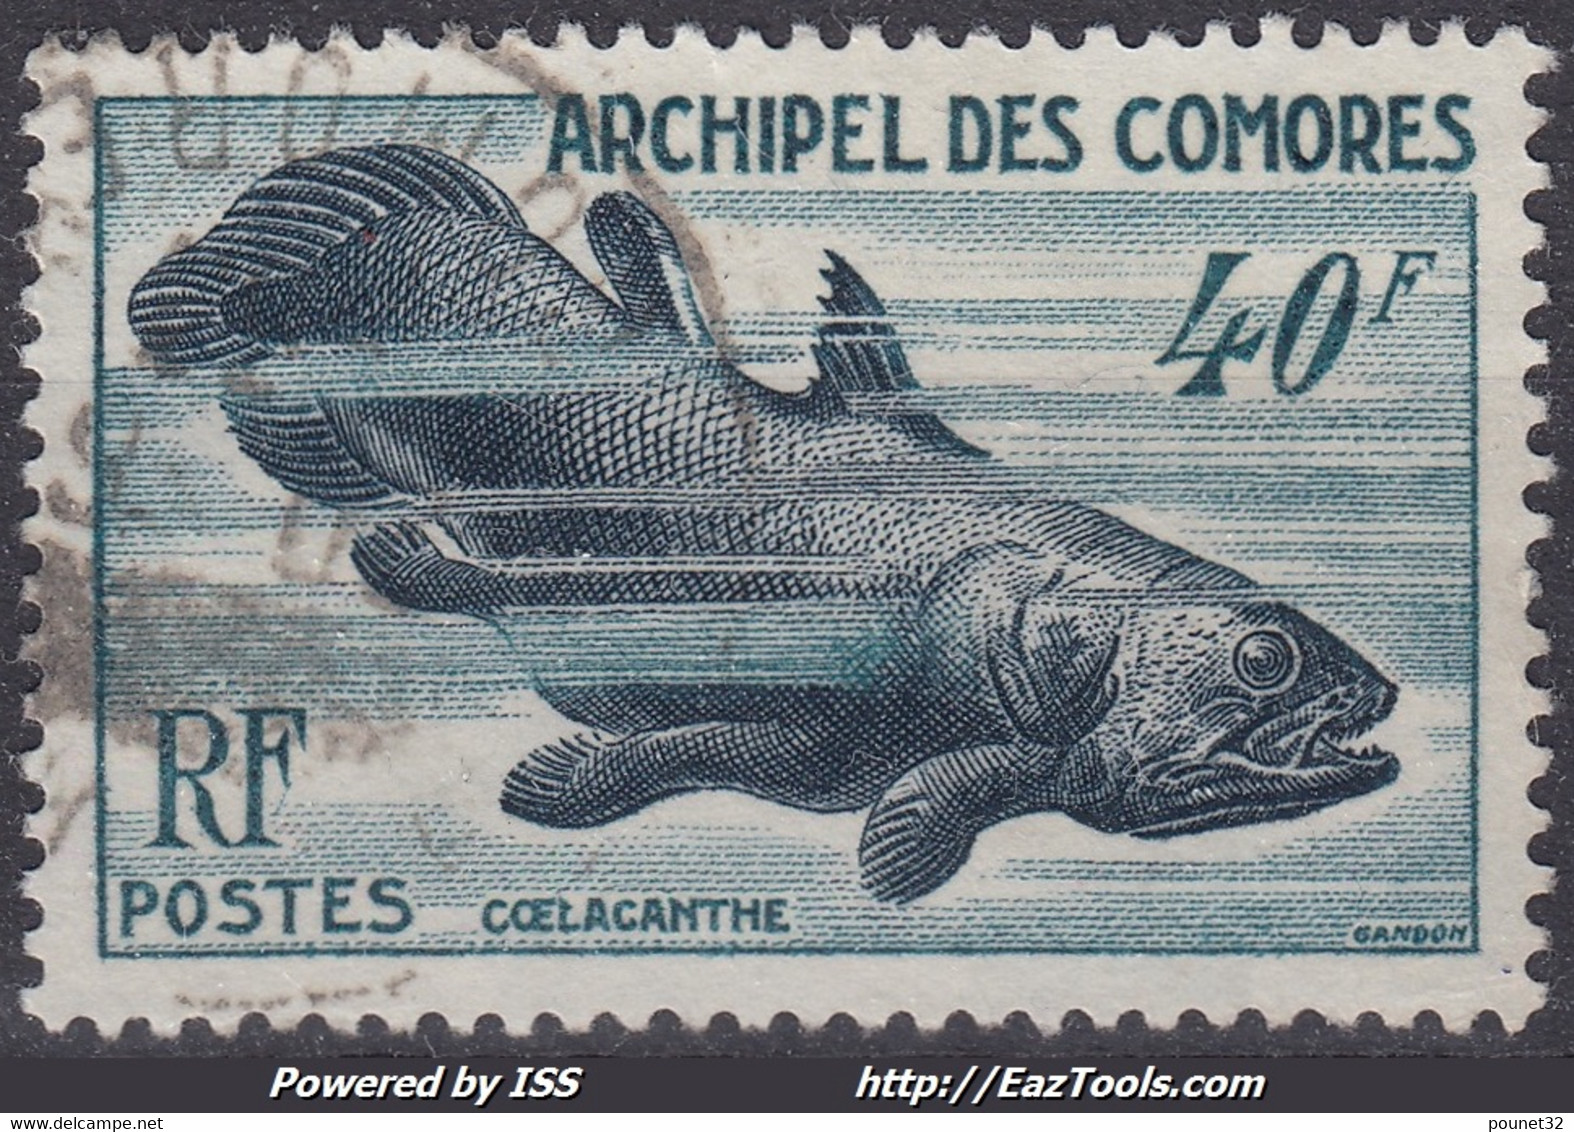 ARCHIPEL DES COMORES : 1954 - POISSON COELACANTHE N° 12 OBLITERATION LEGERE - Used Stamps